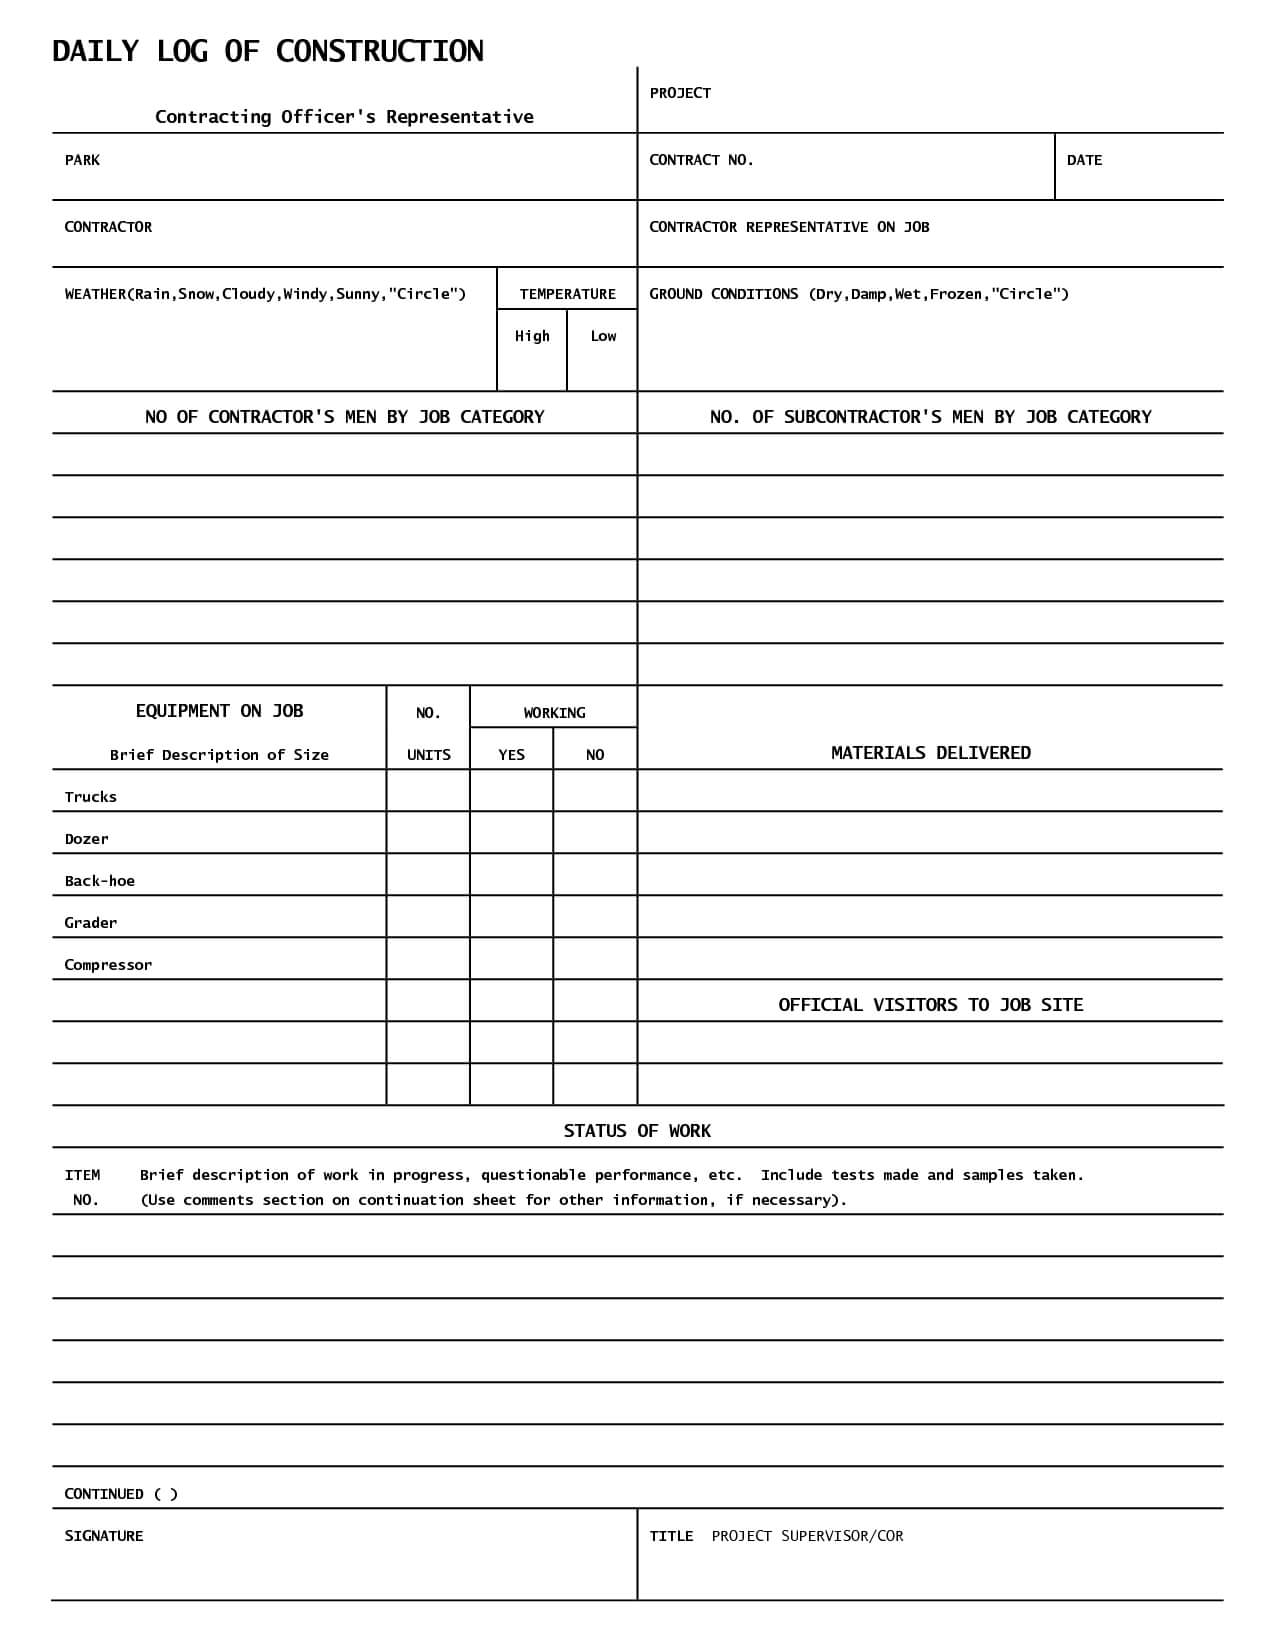 Daily Log Template For Construction – Printable Schedule Inside Superintendent Daily Report Template